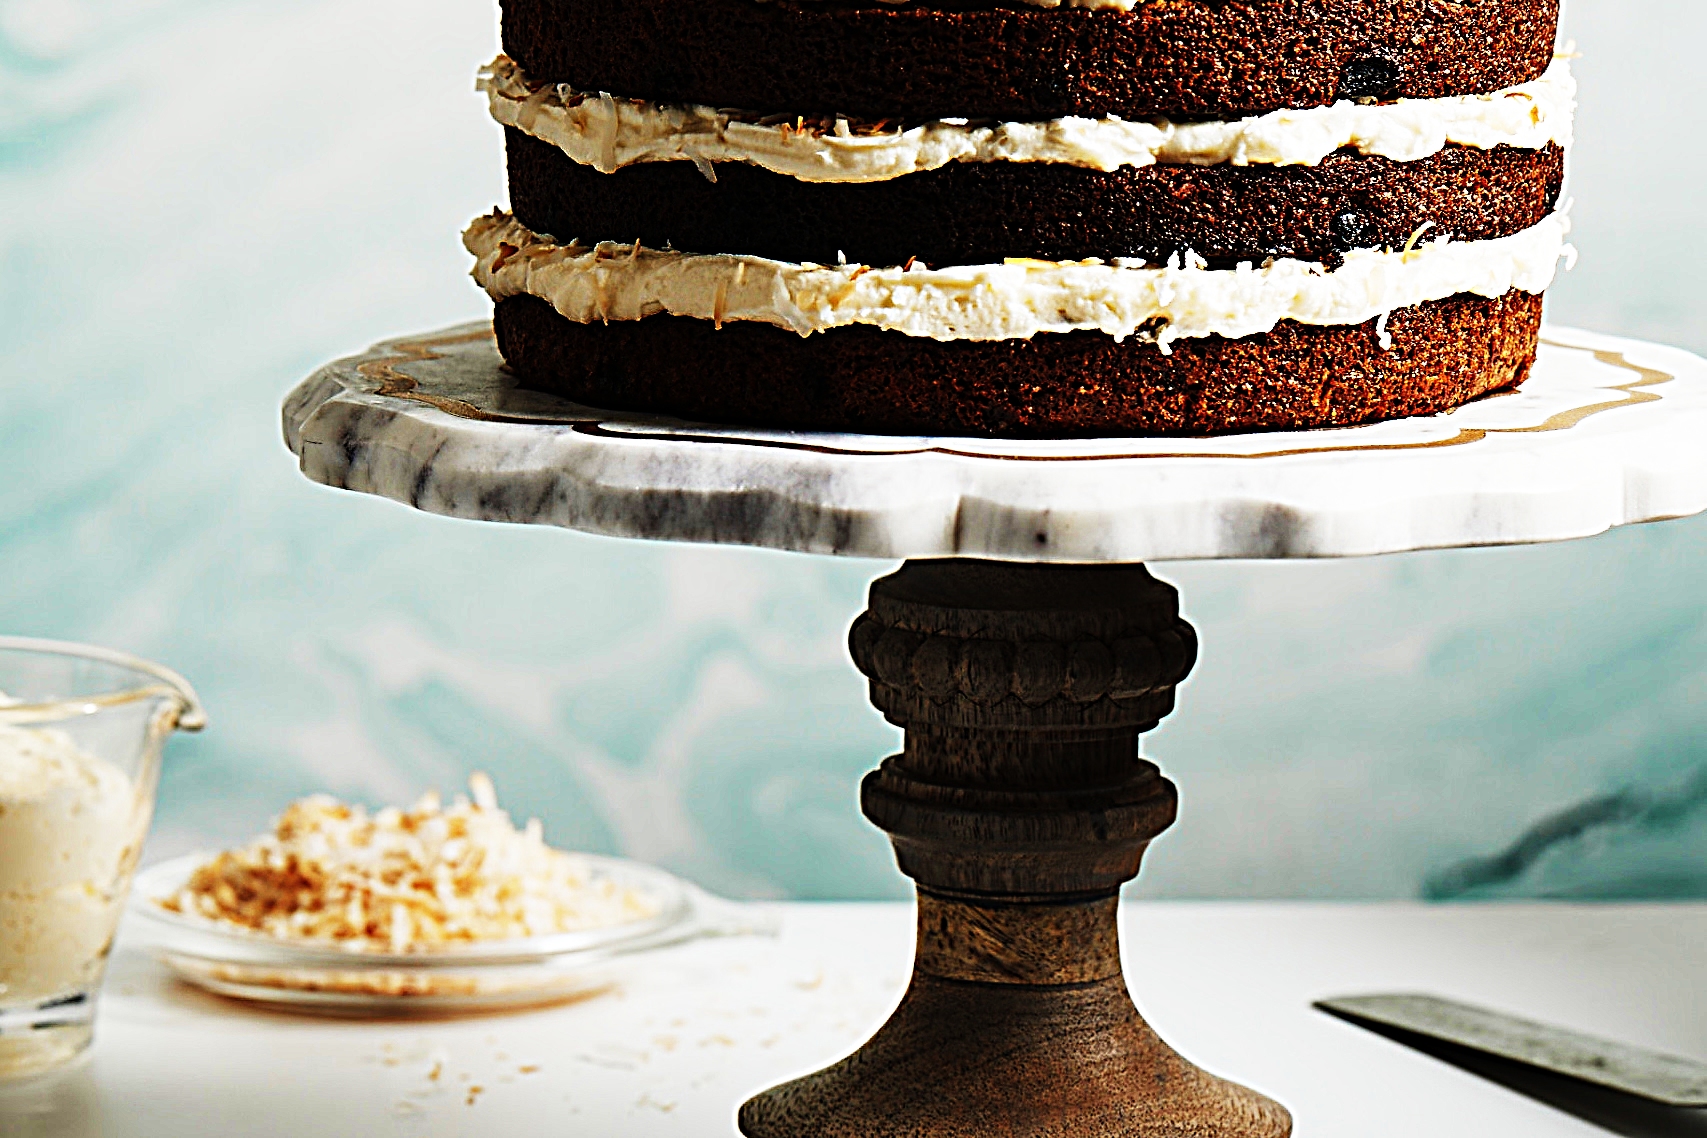 Stupid-Easy Recipe for Three-Layer Carrot Cake with Cream Cheese Frosting (#1 Top-Rated)